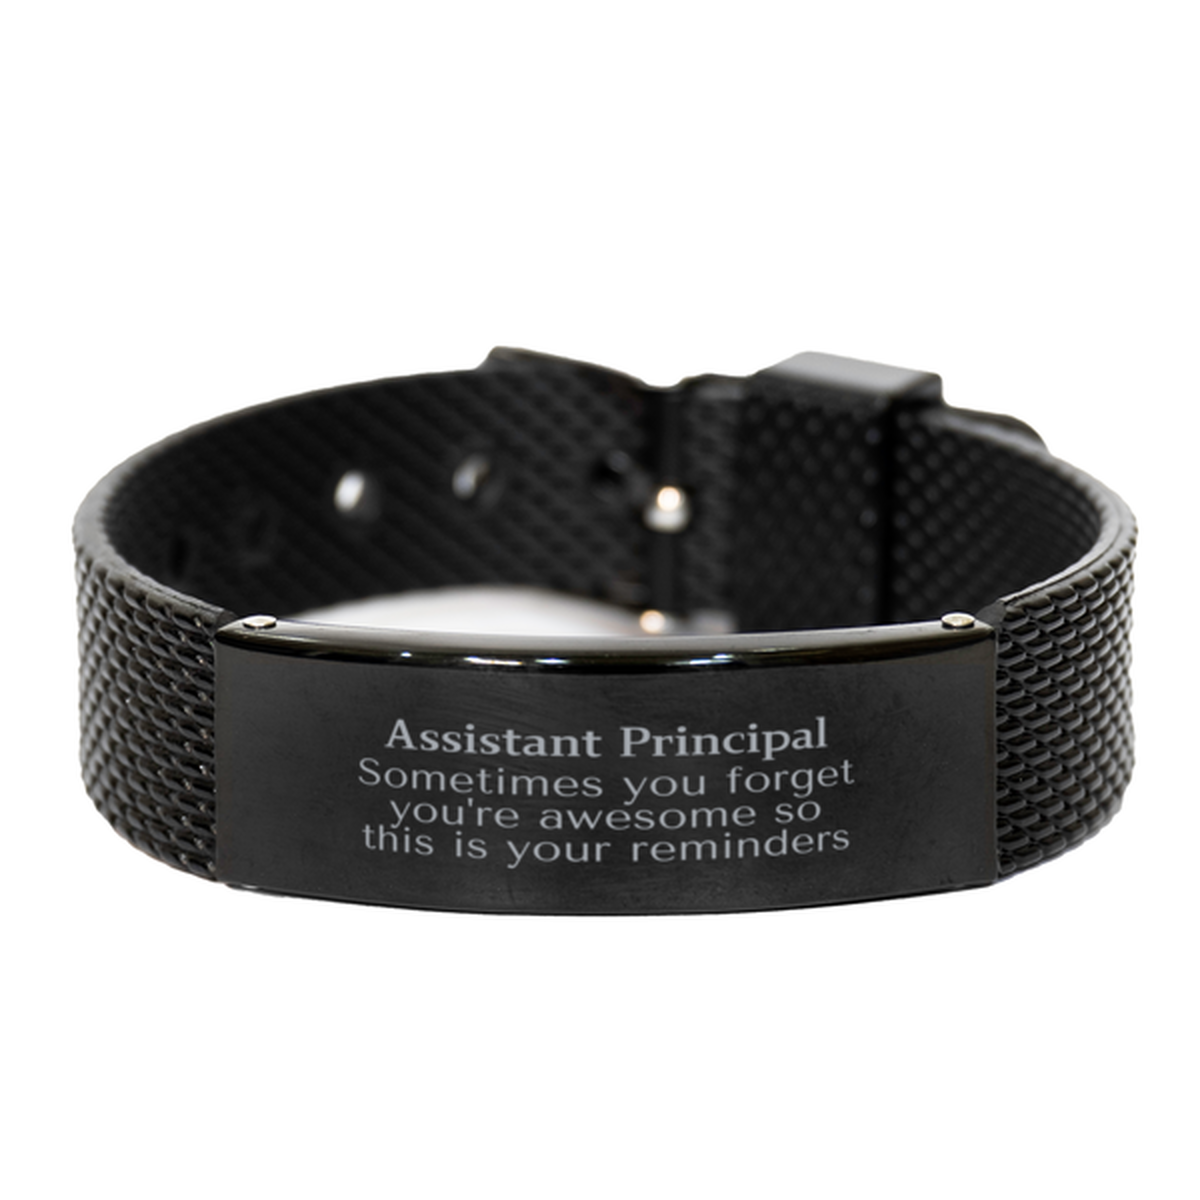 Sentimental Assistant Principal Black Shark Mesh Bracelet, Assistant Principal Sometimes you forget you're awesome so this is your reminders, Graduation Christmas Birthday Gifts for Assistant Principal, Men, Women, Coworkers